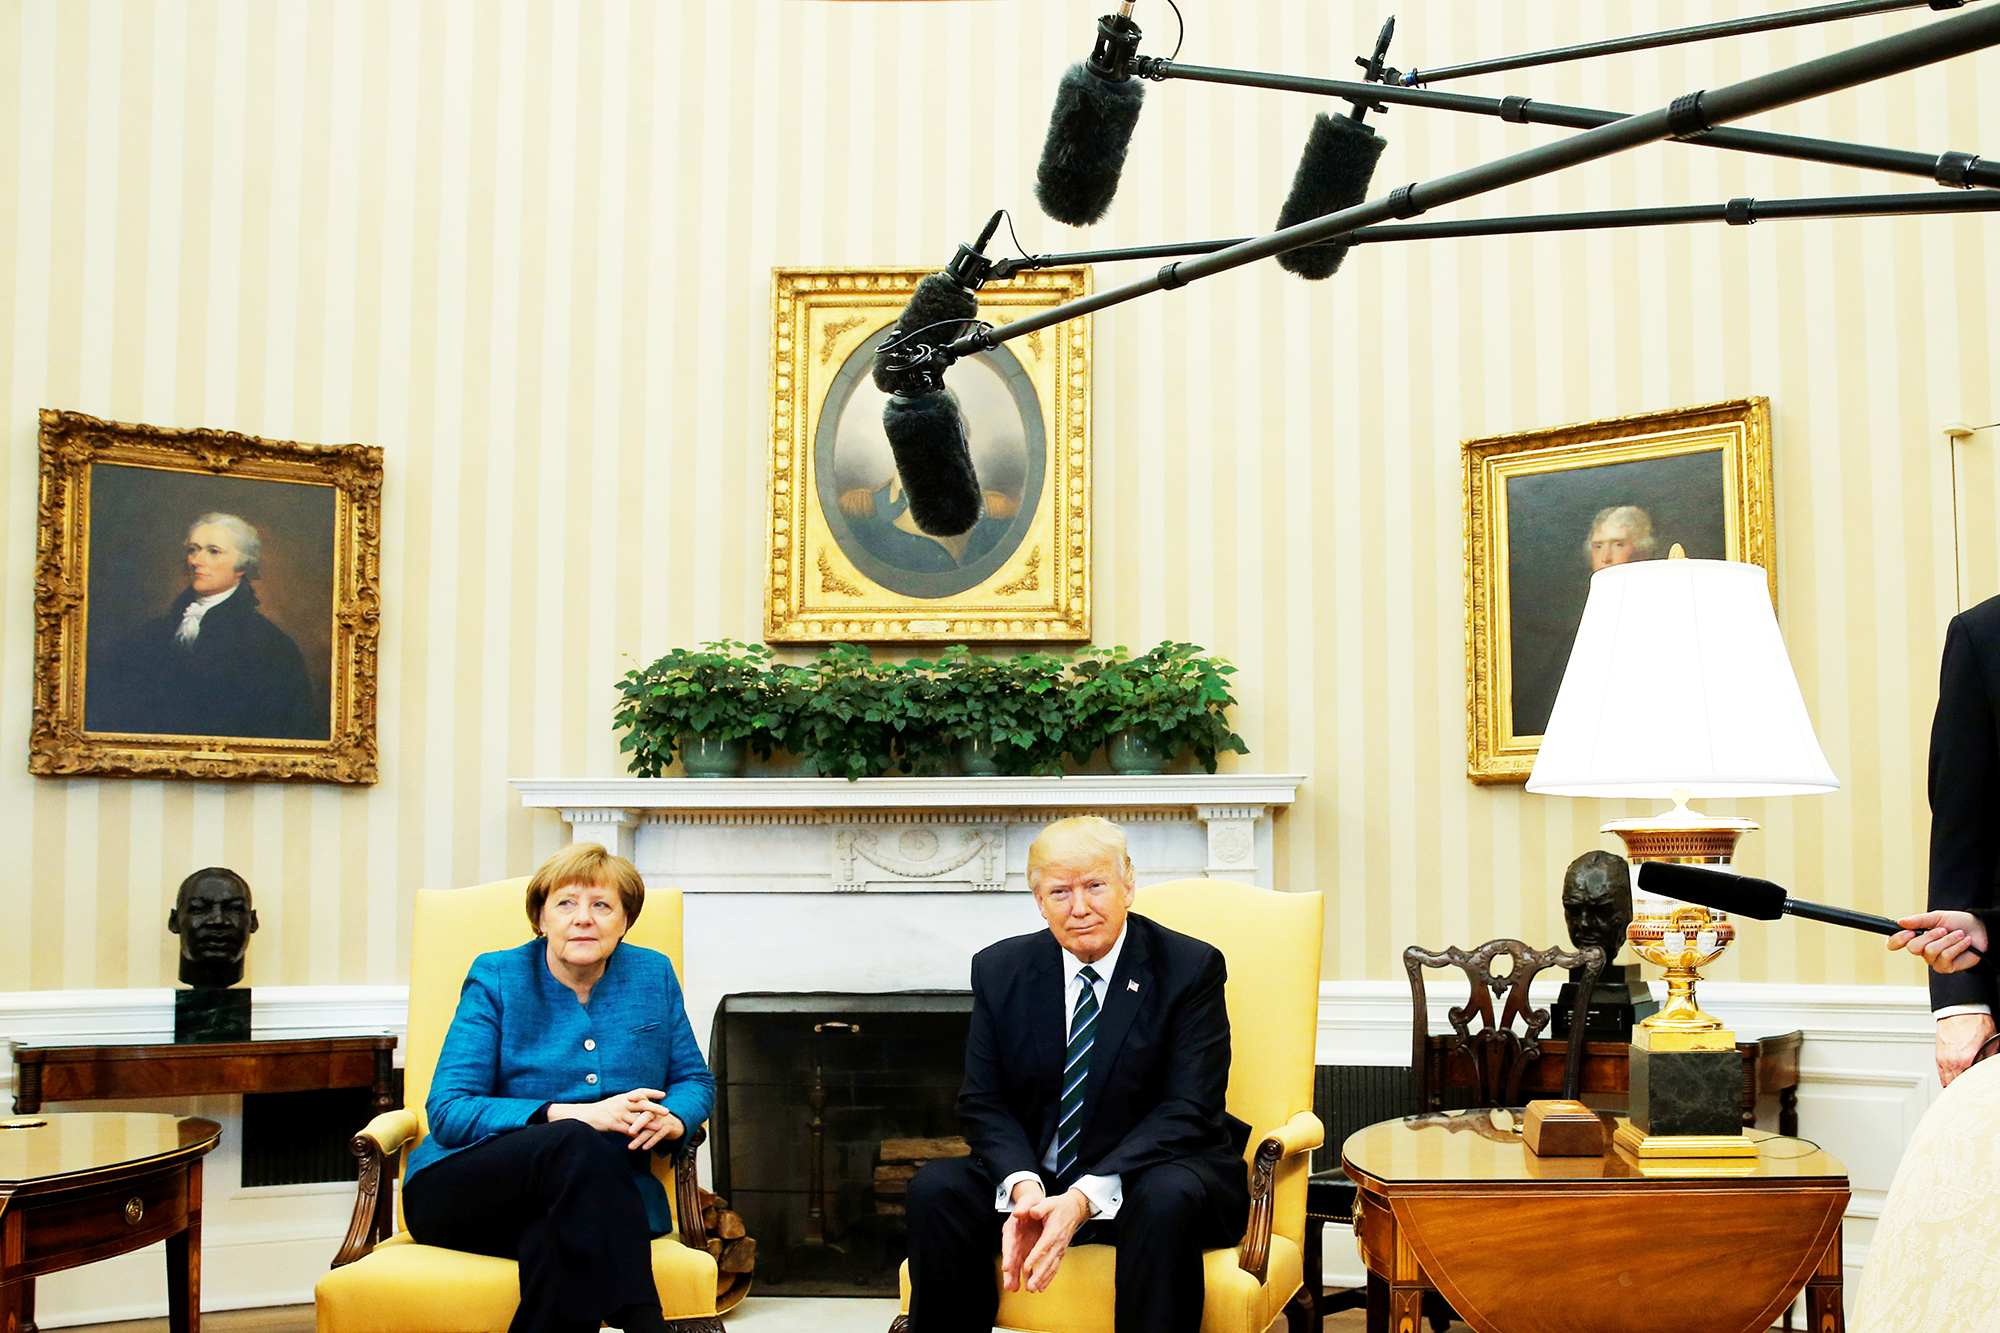 Germany's Chancellor Angela Merkel meets with Donald Trump, after notably not shaking hands at the White House in Washington, D.C., on March 17, 2017.